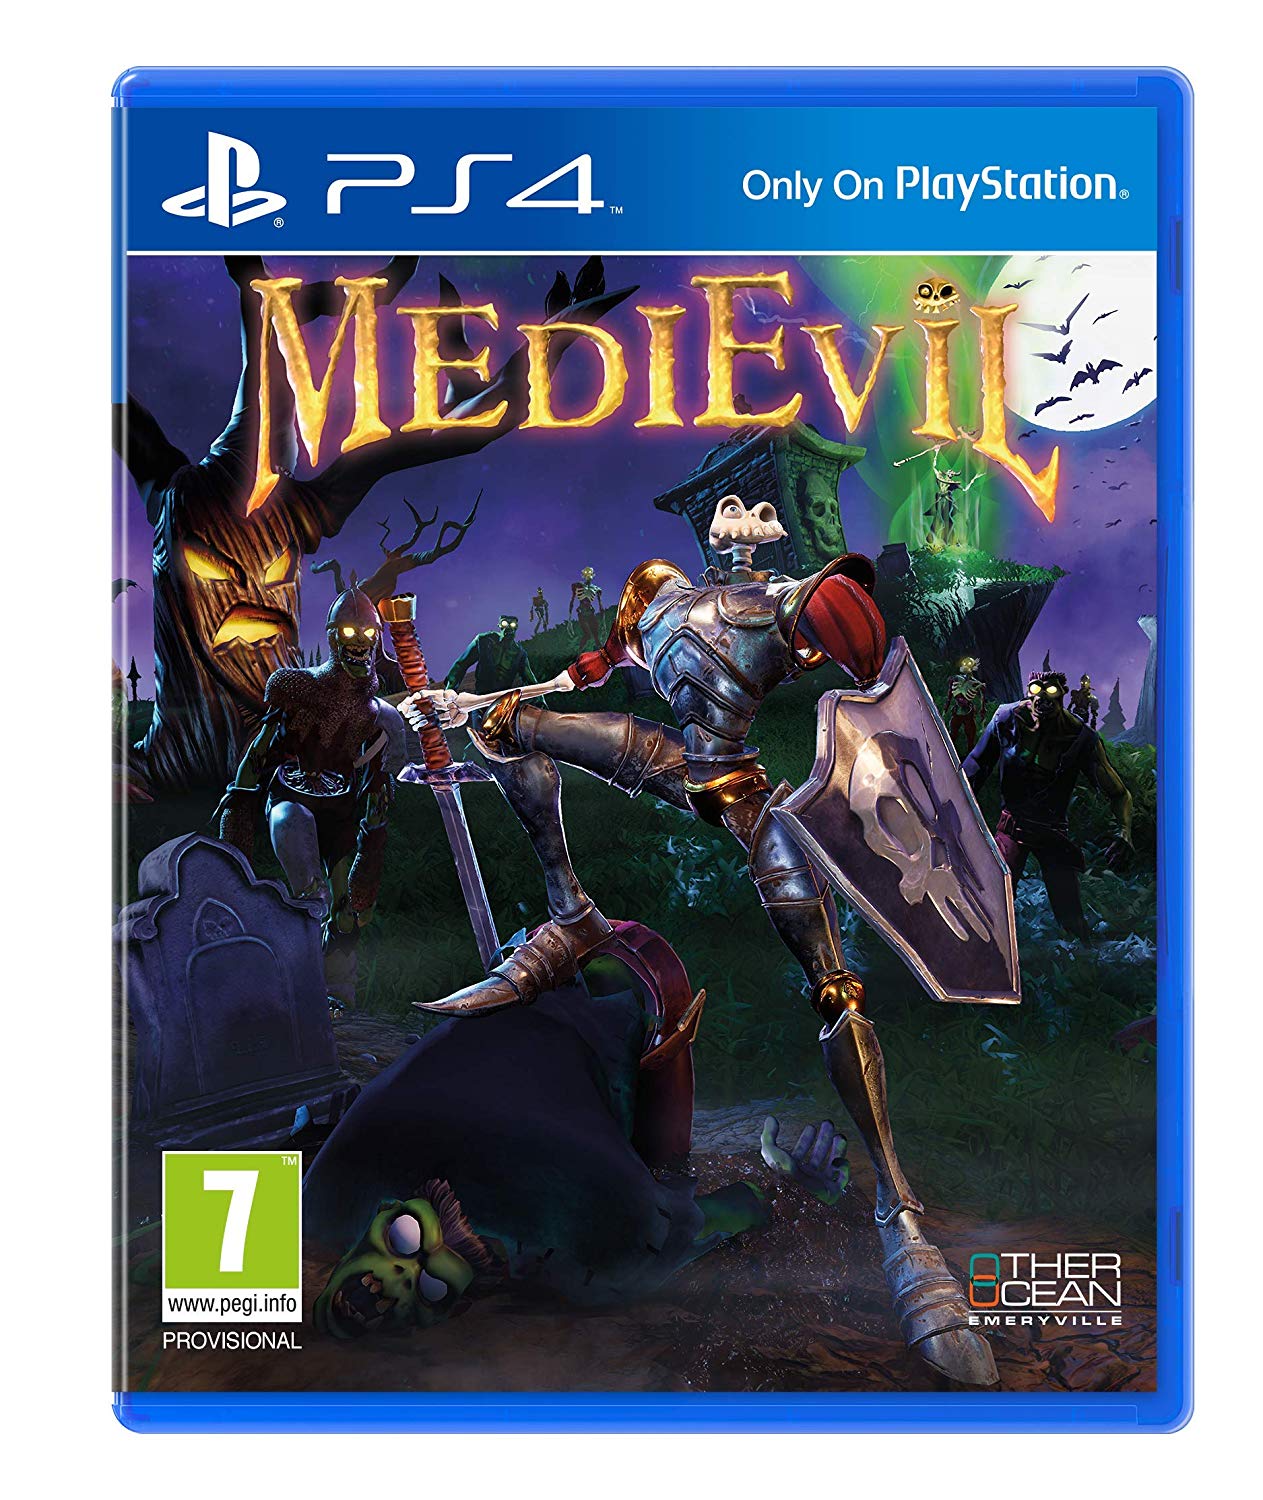 Videojuego Medievil: State of Play solo 25,9€